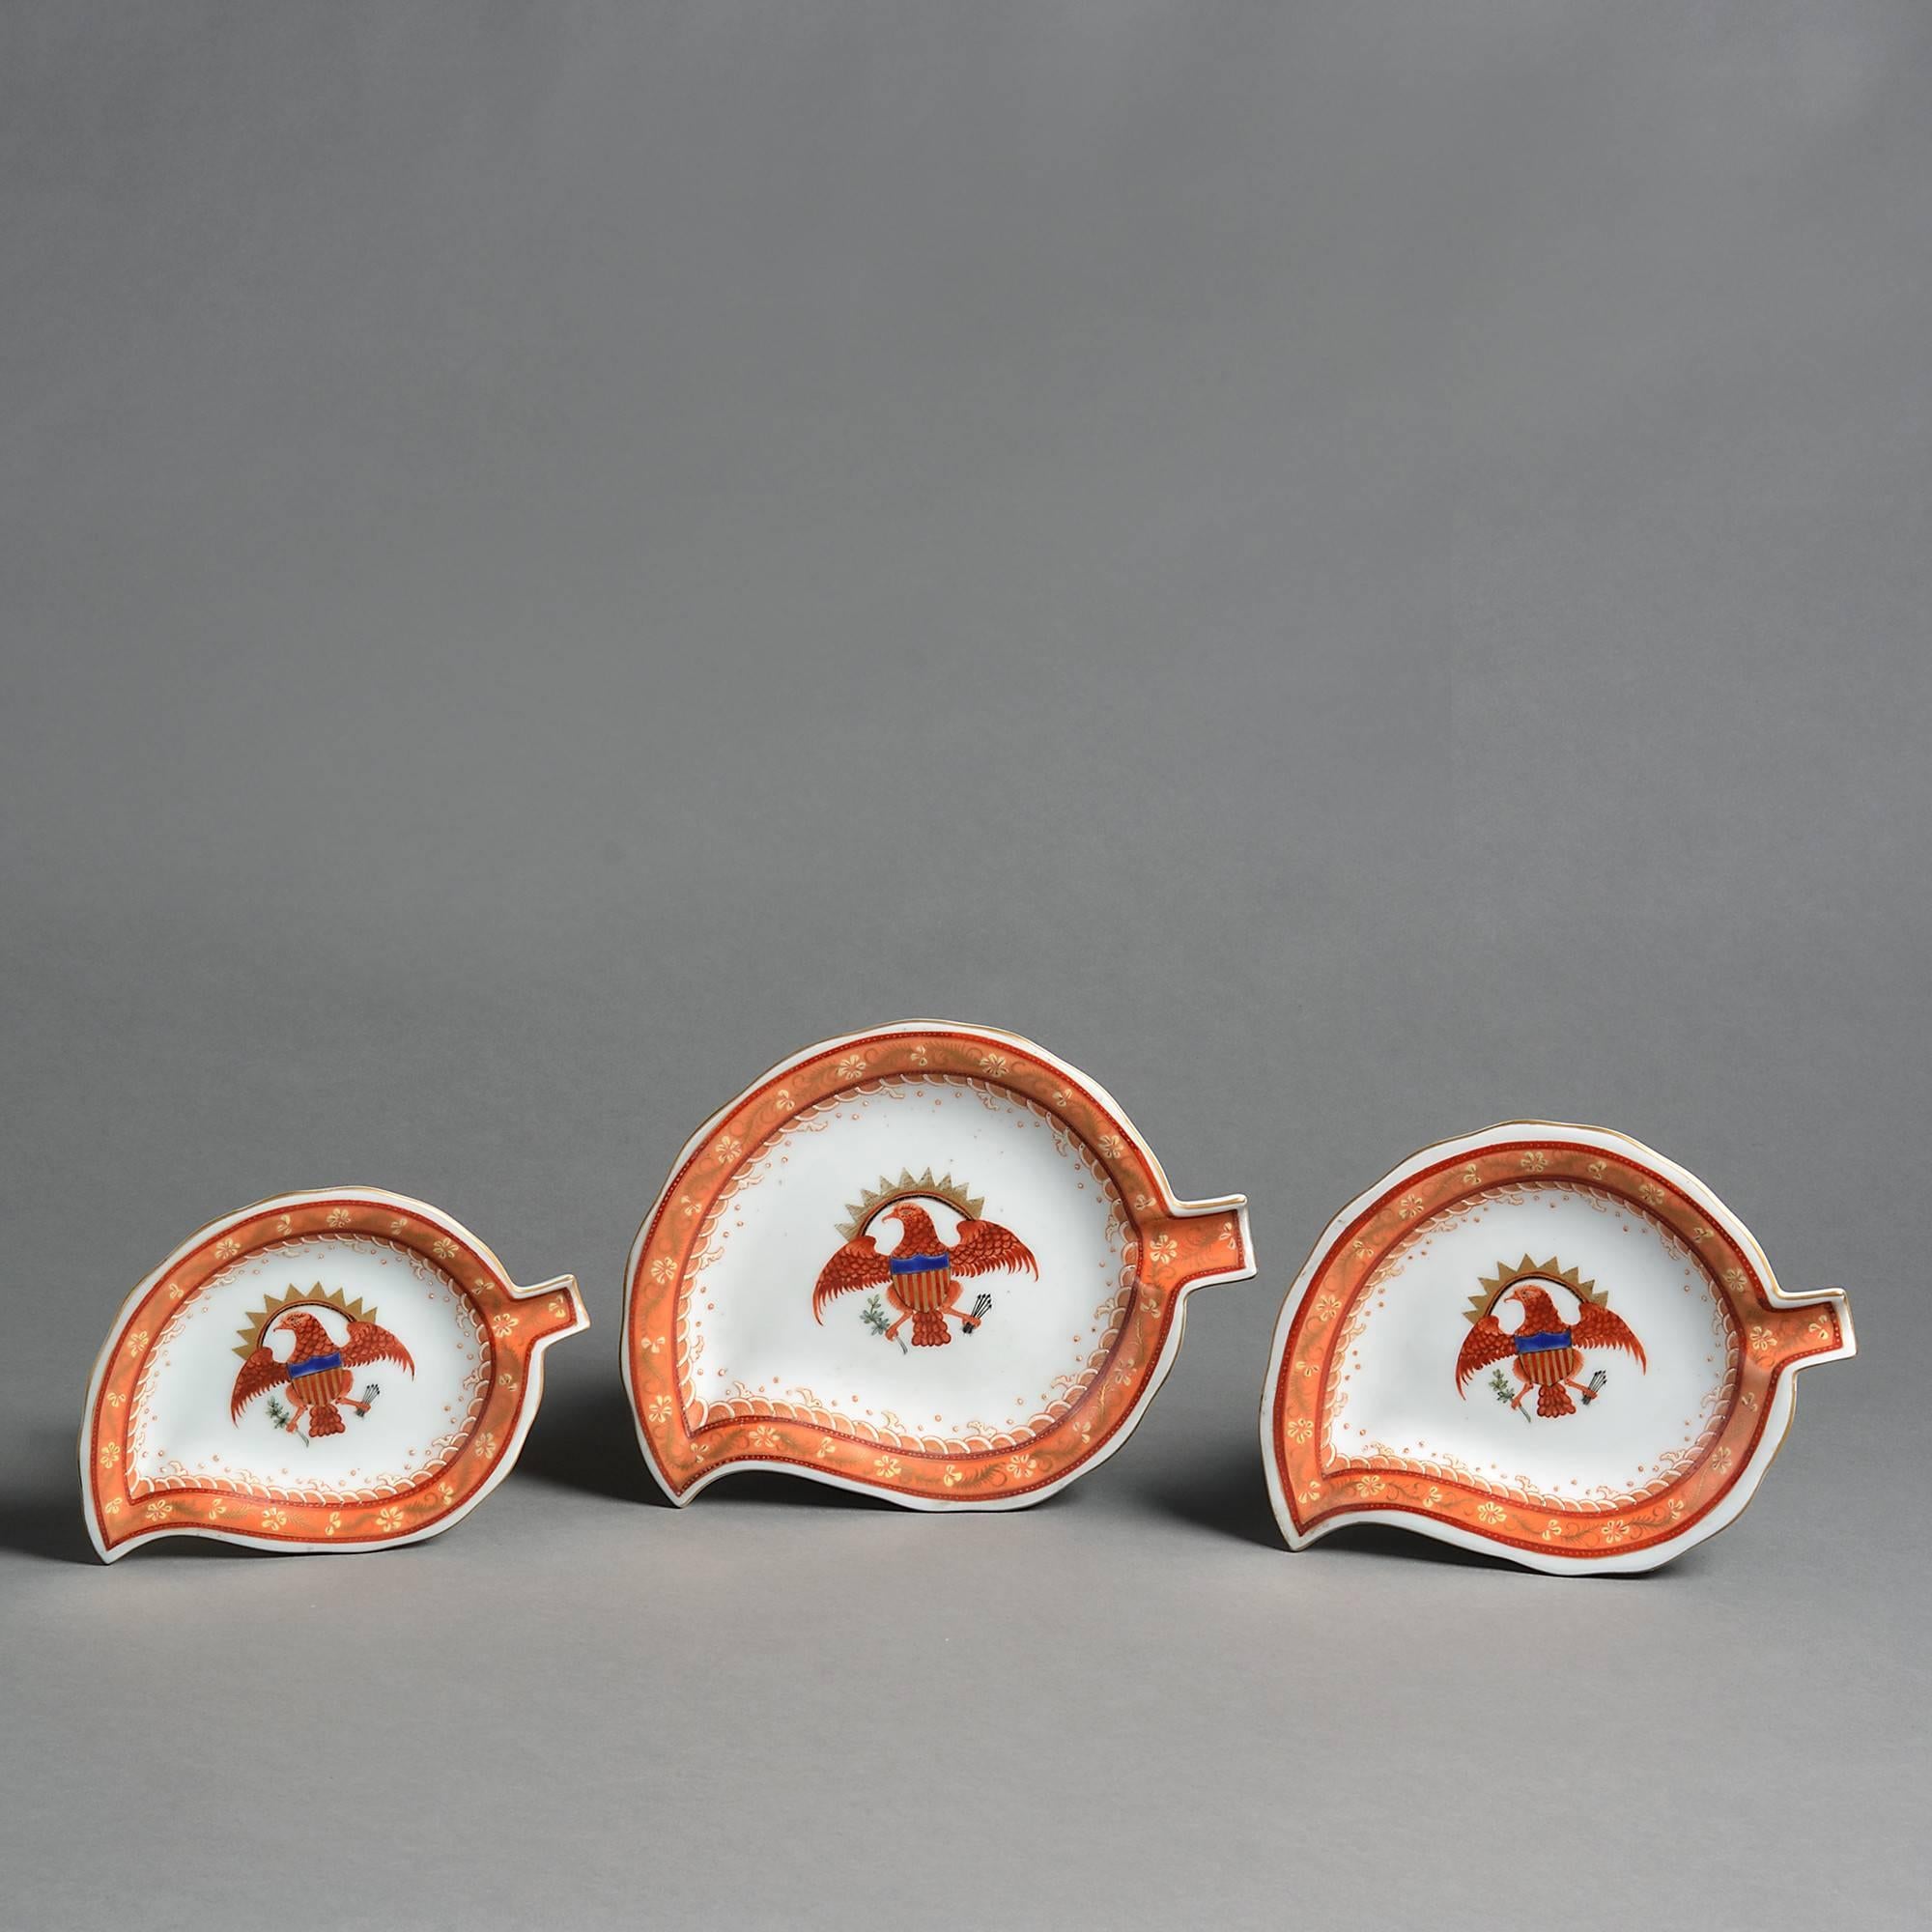 A set of three Chinese Export style porcelain leaf dishes, decorated with red, blue, green and gold glazes upon a white ground, each depicting the Great Seal of the United States: A bald eagle proper displayed bearing in its dexter talon an olive